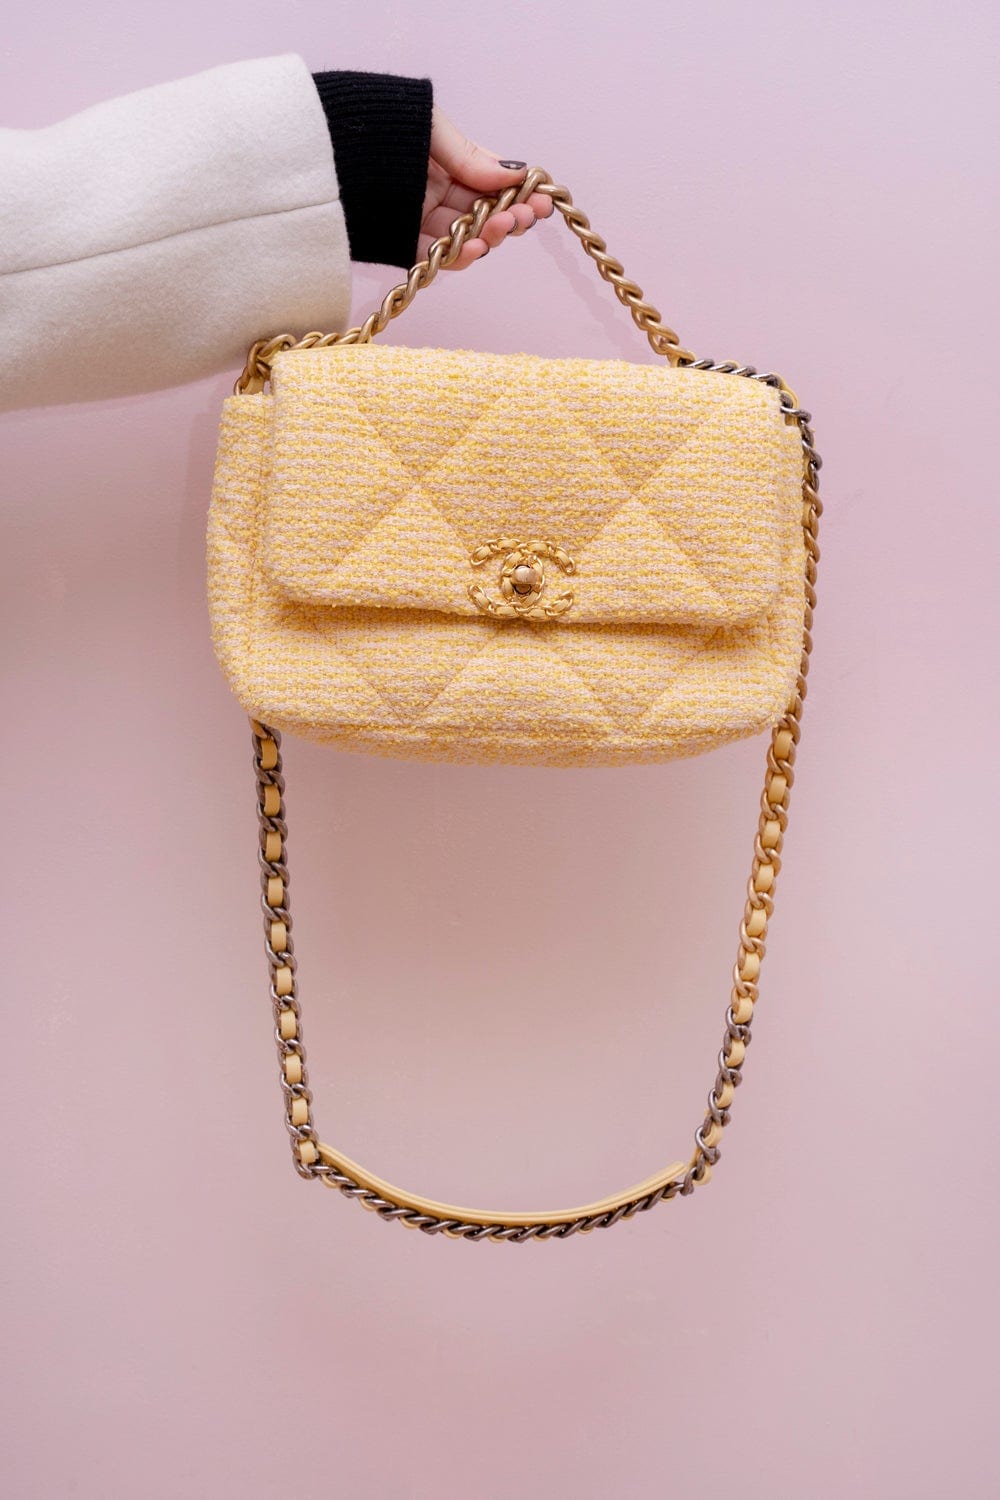 chanel cruise 2011 bags